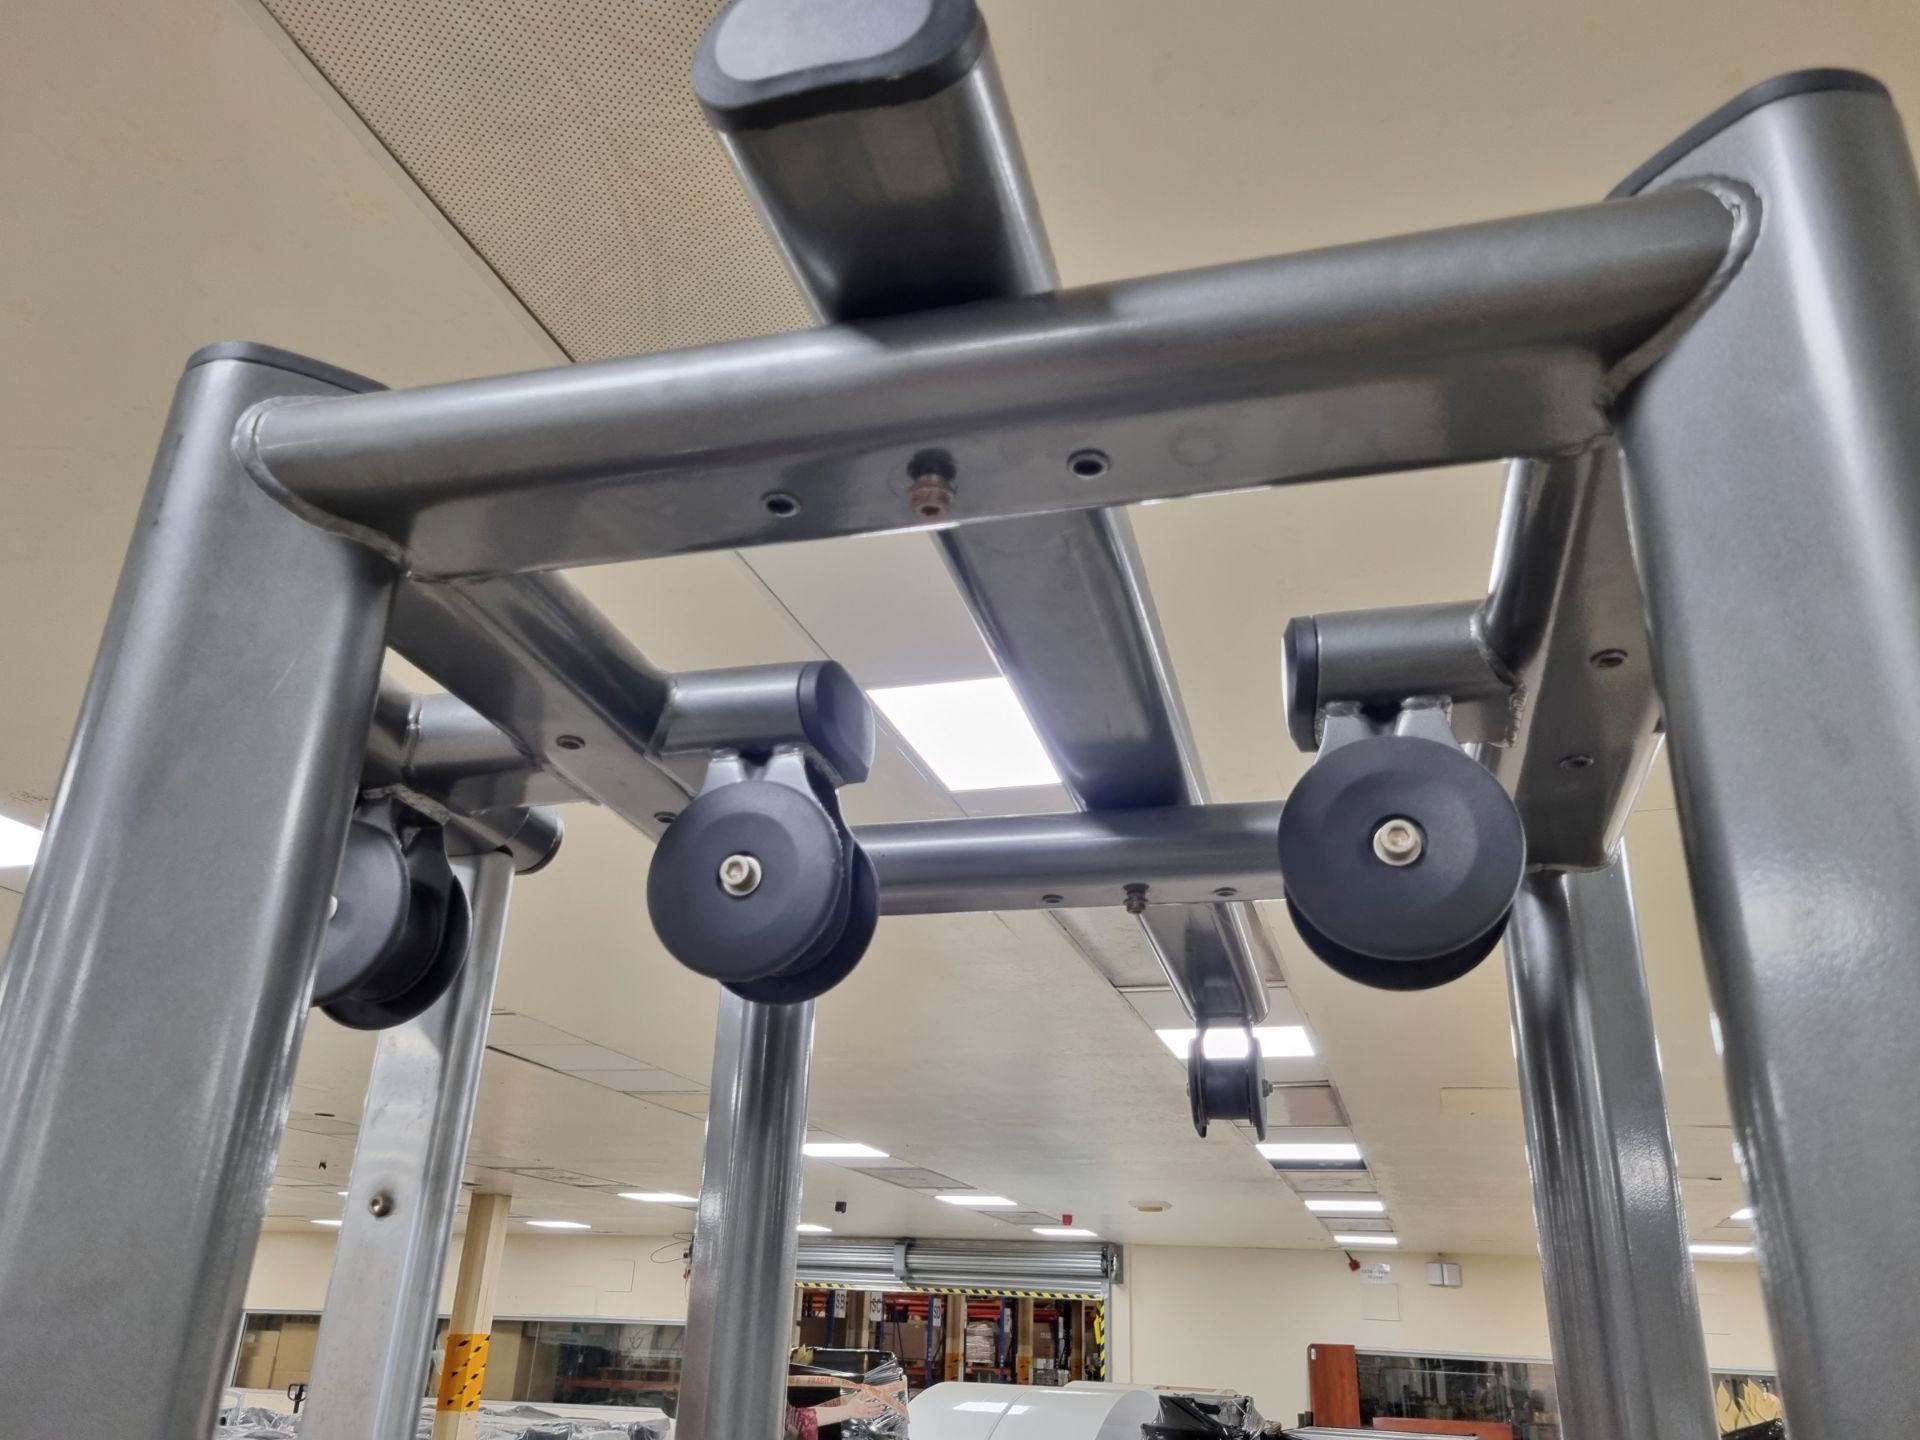 Life fitness gym multi station - seated row - lat pull down - L 3650 x W 1275 x H 2250mm - Image 4 of 10